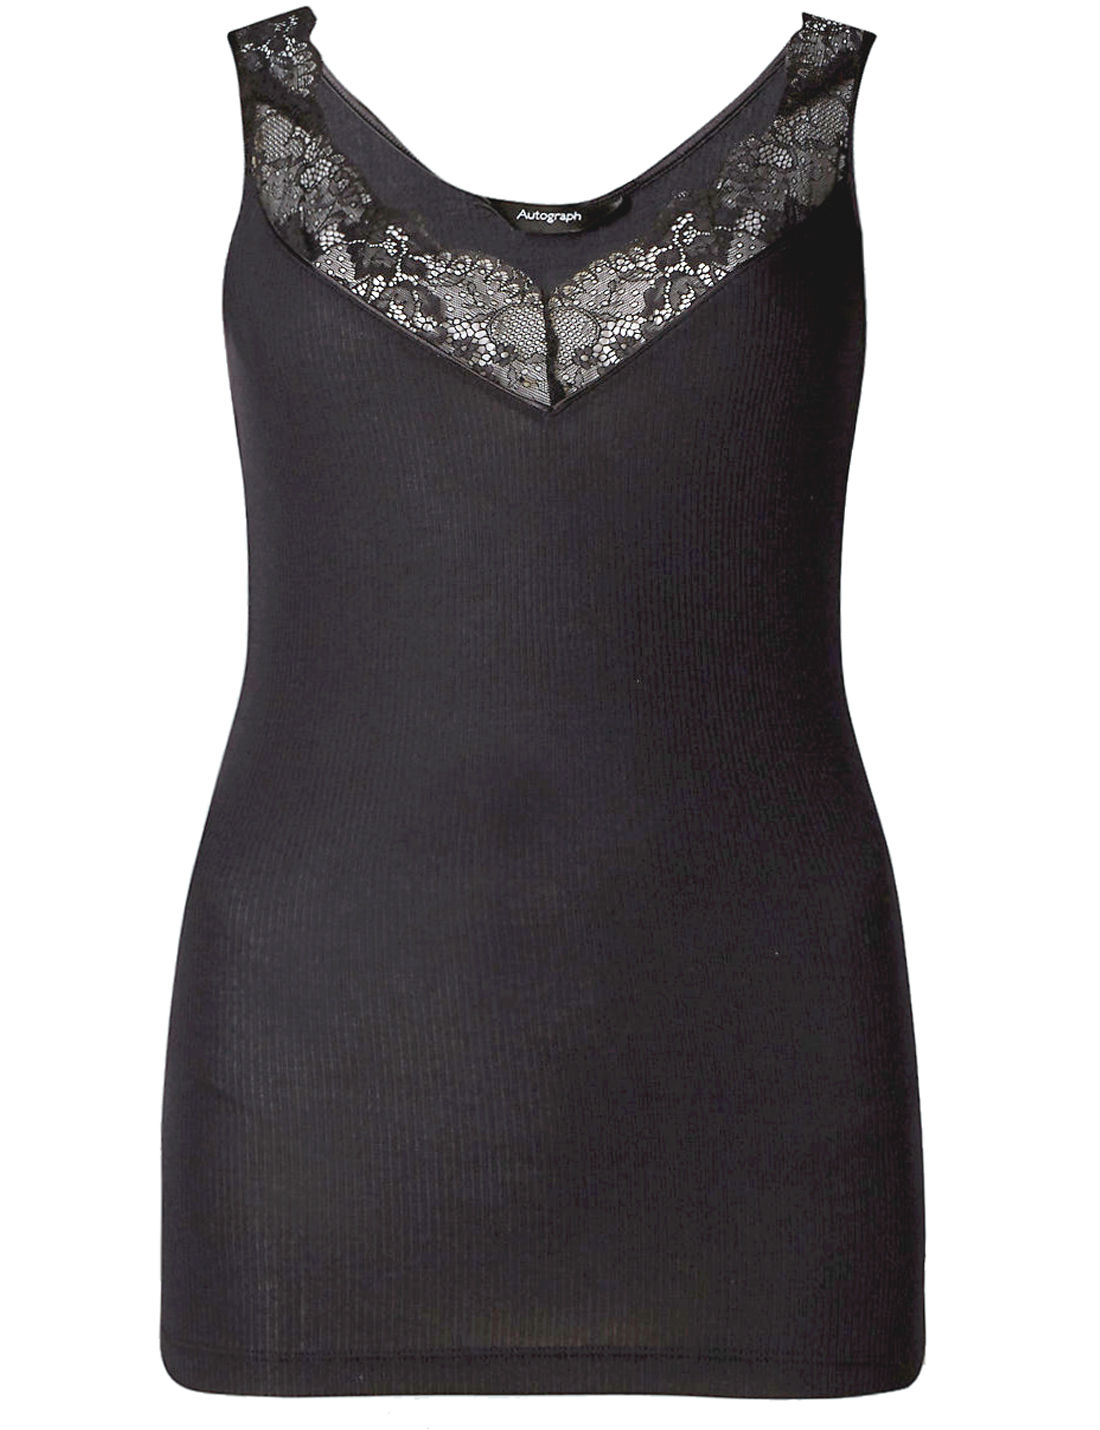 Marks and Spencer - - IRREGULAR - M&5 4utograph BLACK Thermal Vest with ...